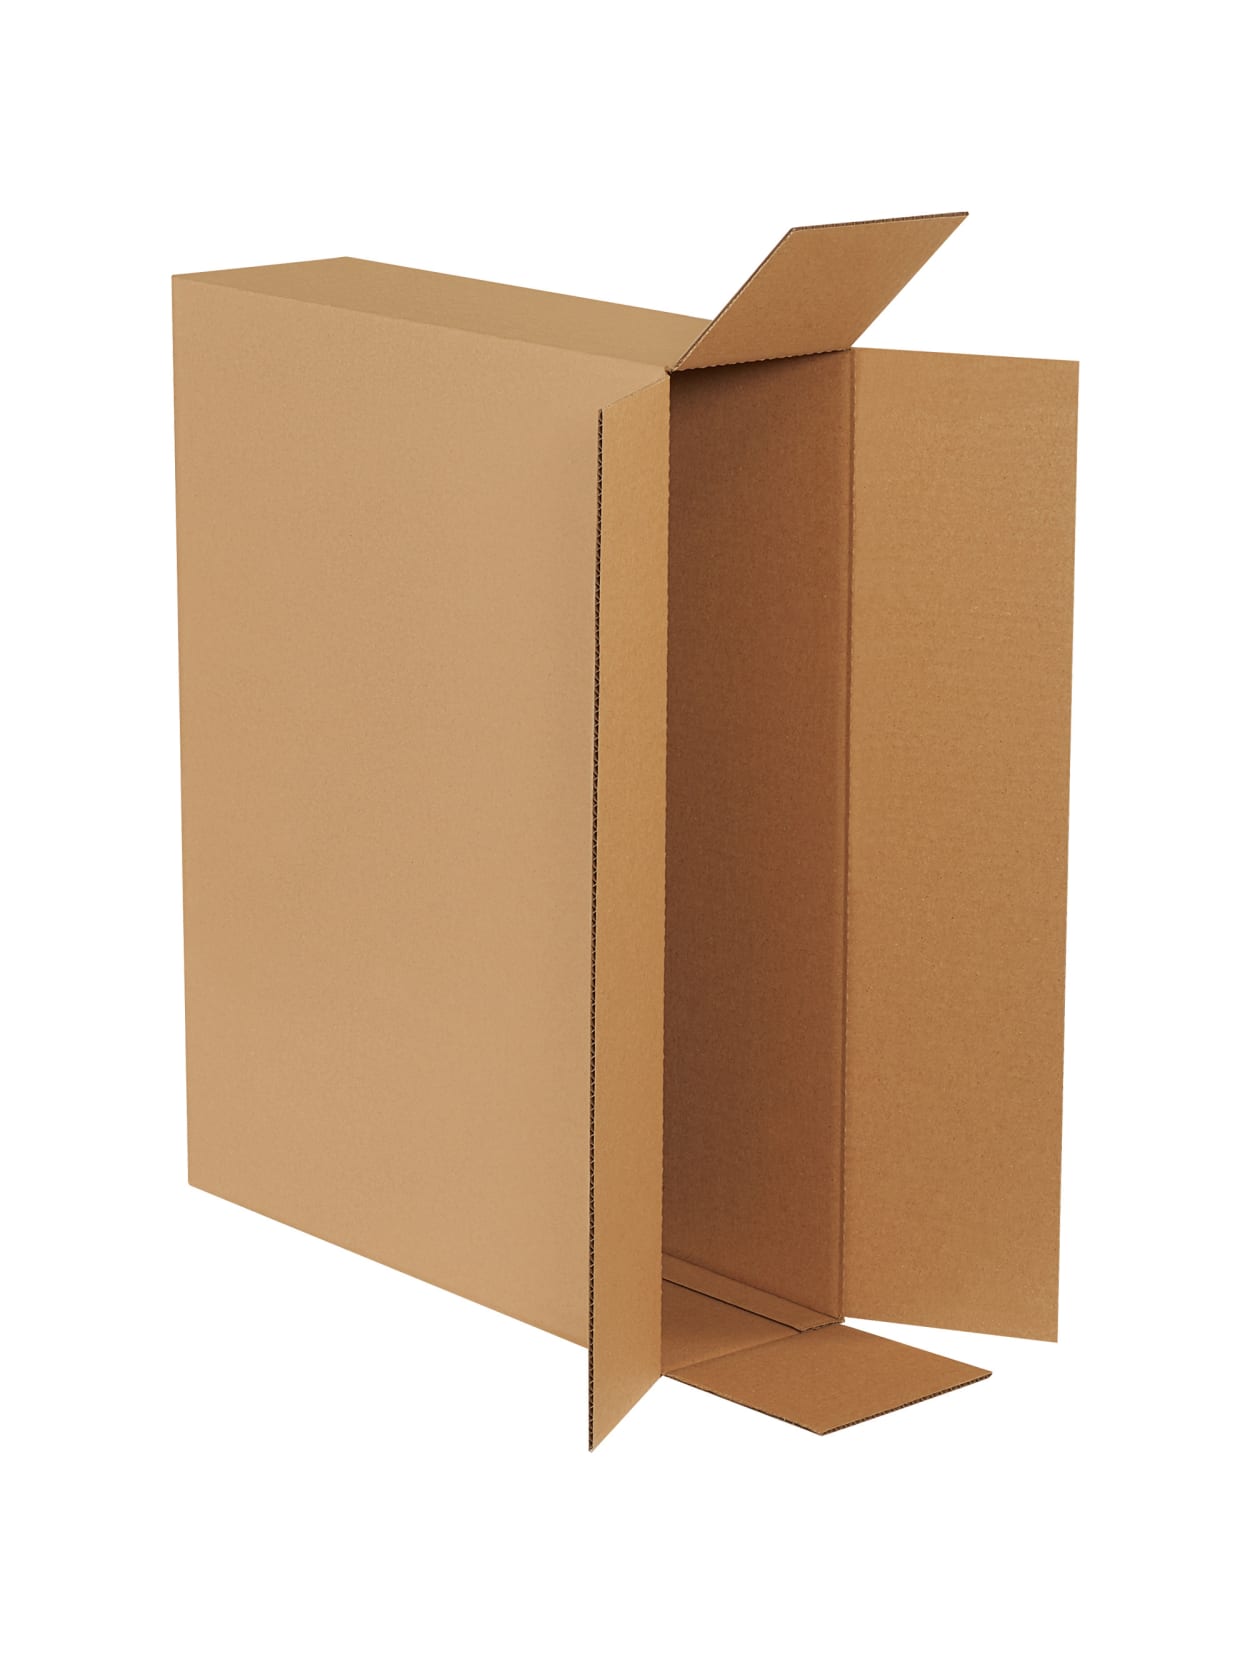 Details about    5 Medium Moving Boxes 20x14x10 Packing Cardboard Pack of 5ct 20 x 14 x 10